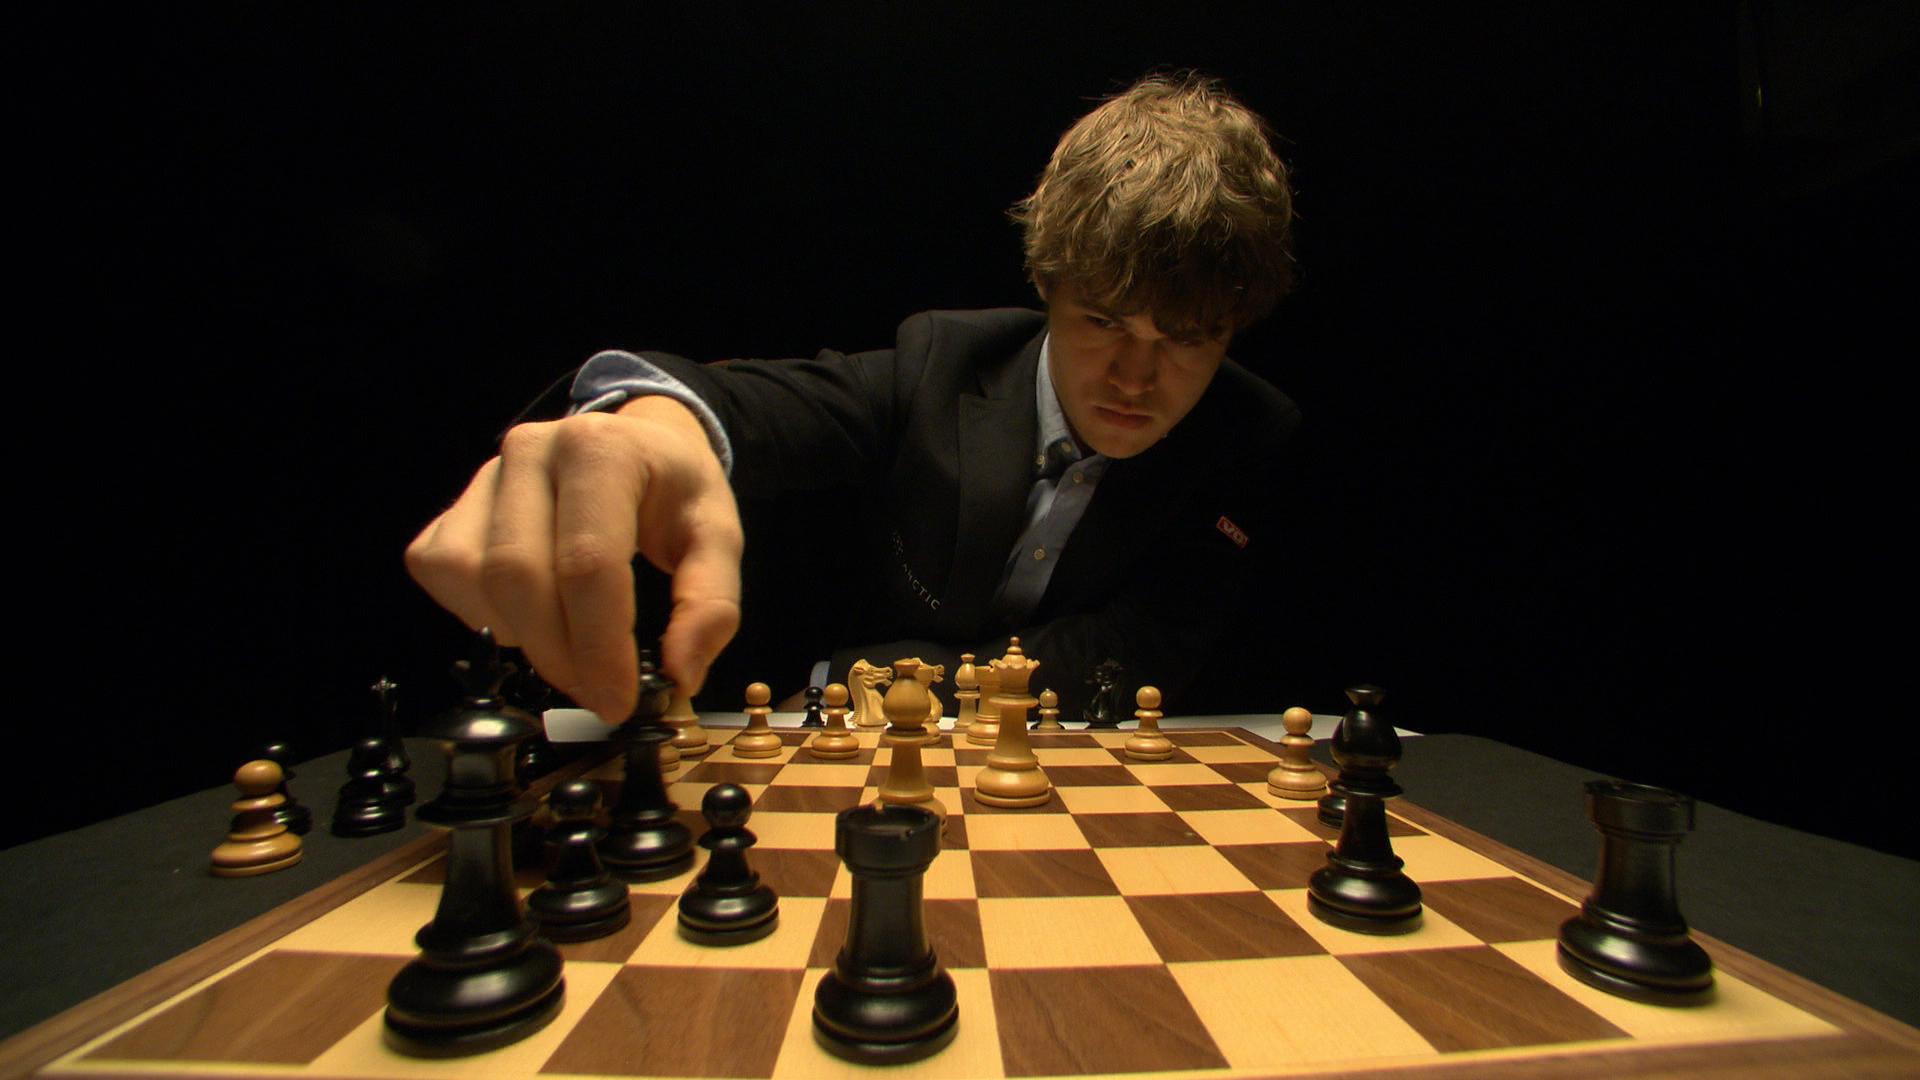 World No. 1 chess player says he played mediocre at best - Dot